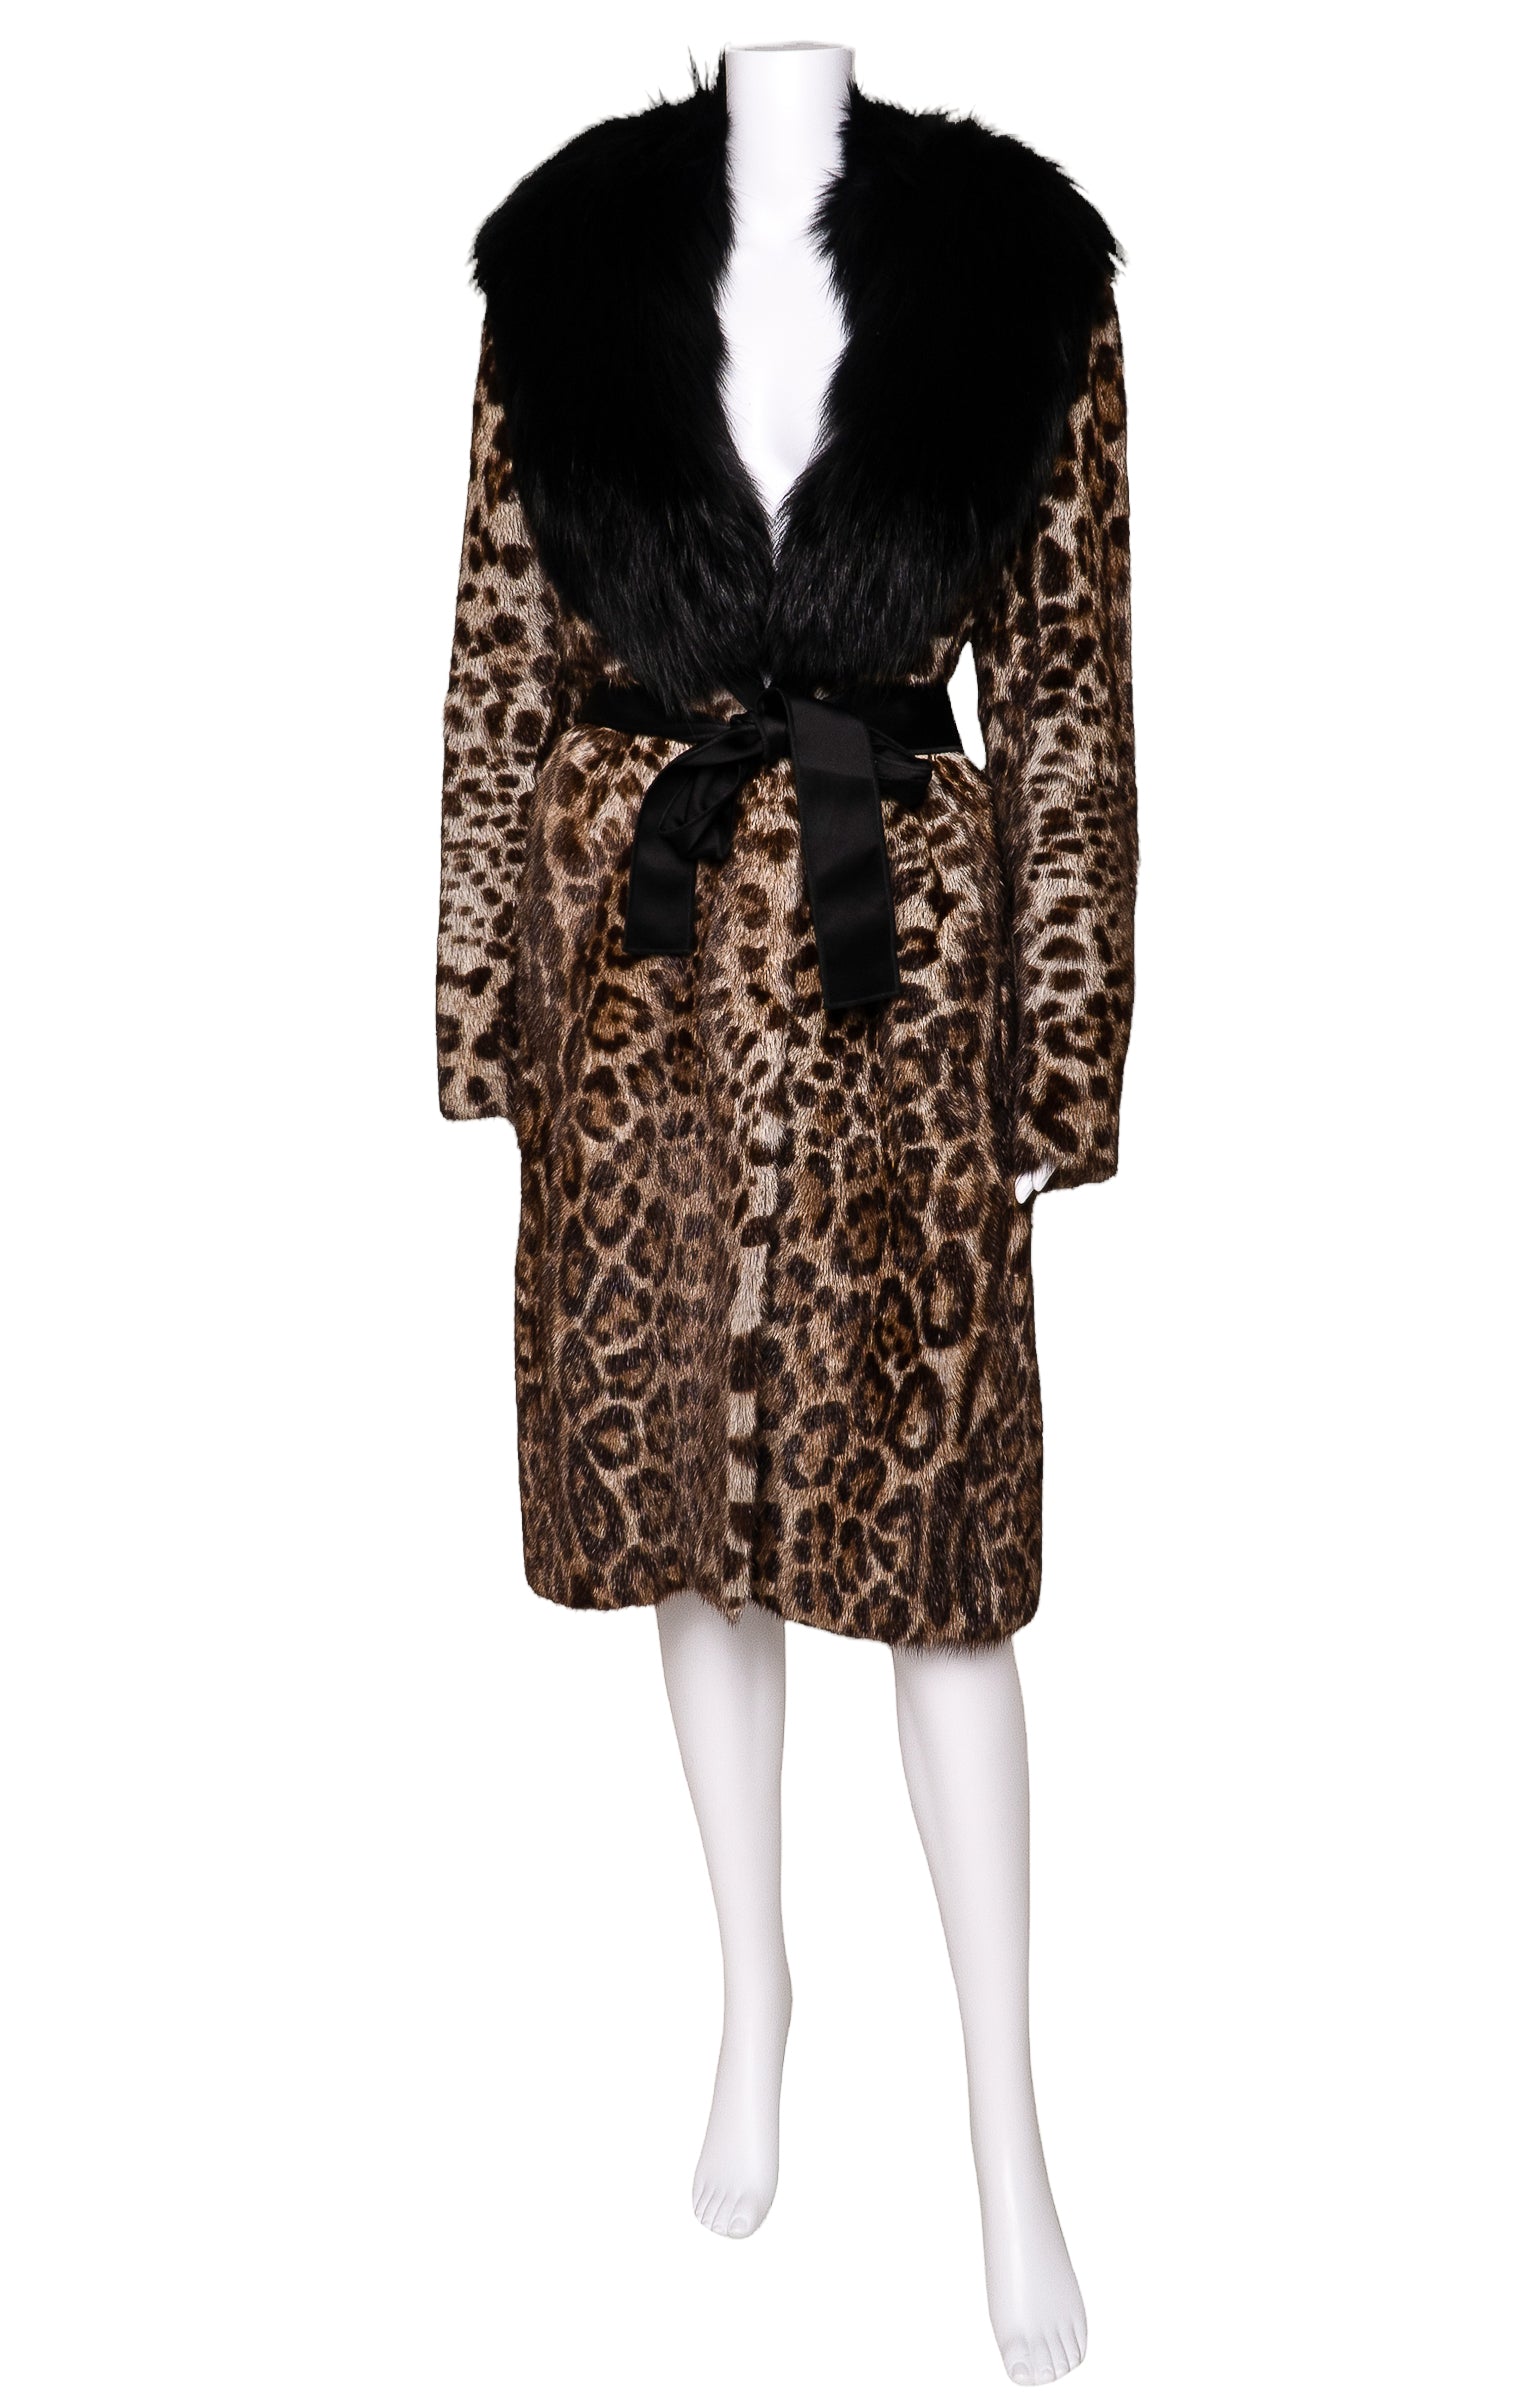 DOLCE & GABBANA (RARE) Coat Size: IT 44 / Comparable to US 6-8